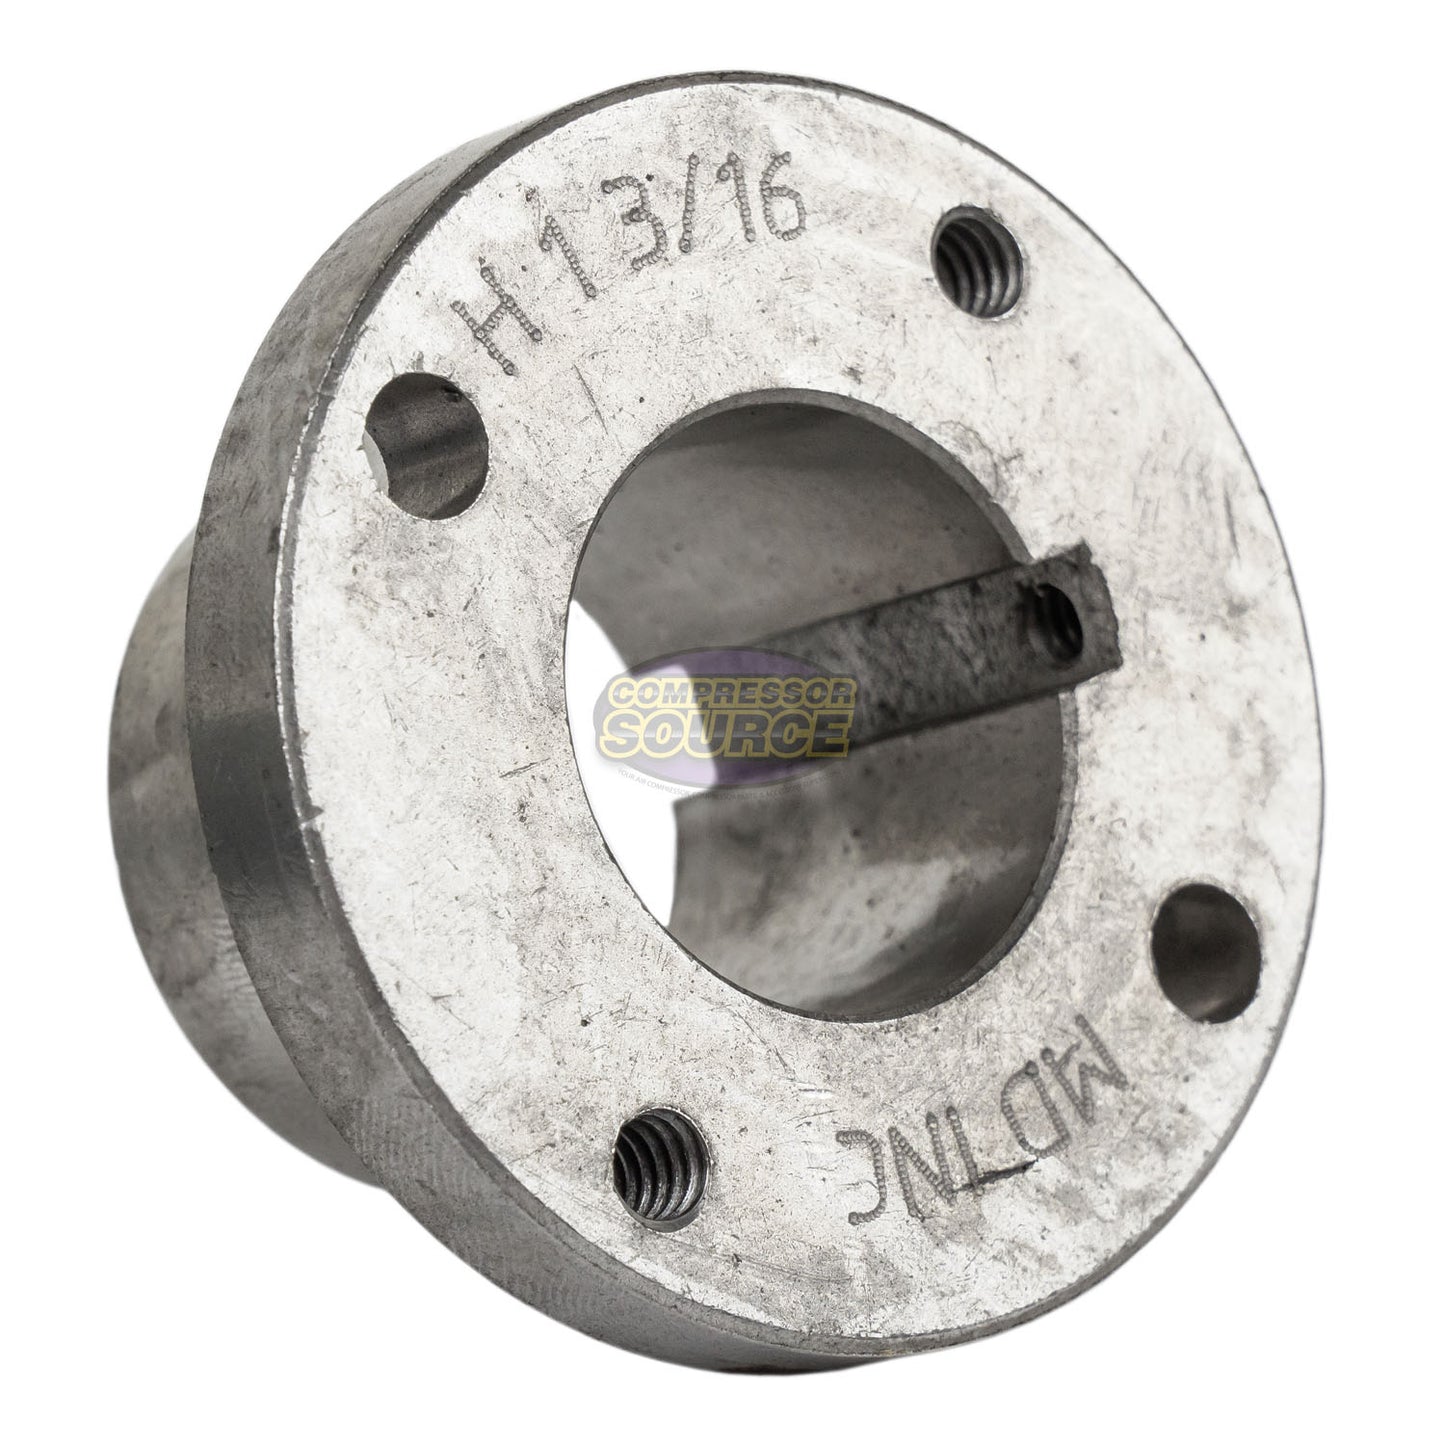 Cast Iron 4.5" Dual Groove Belt A Section 4L Pulley w/ 1-3/16" Sheave Bushing